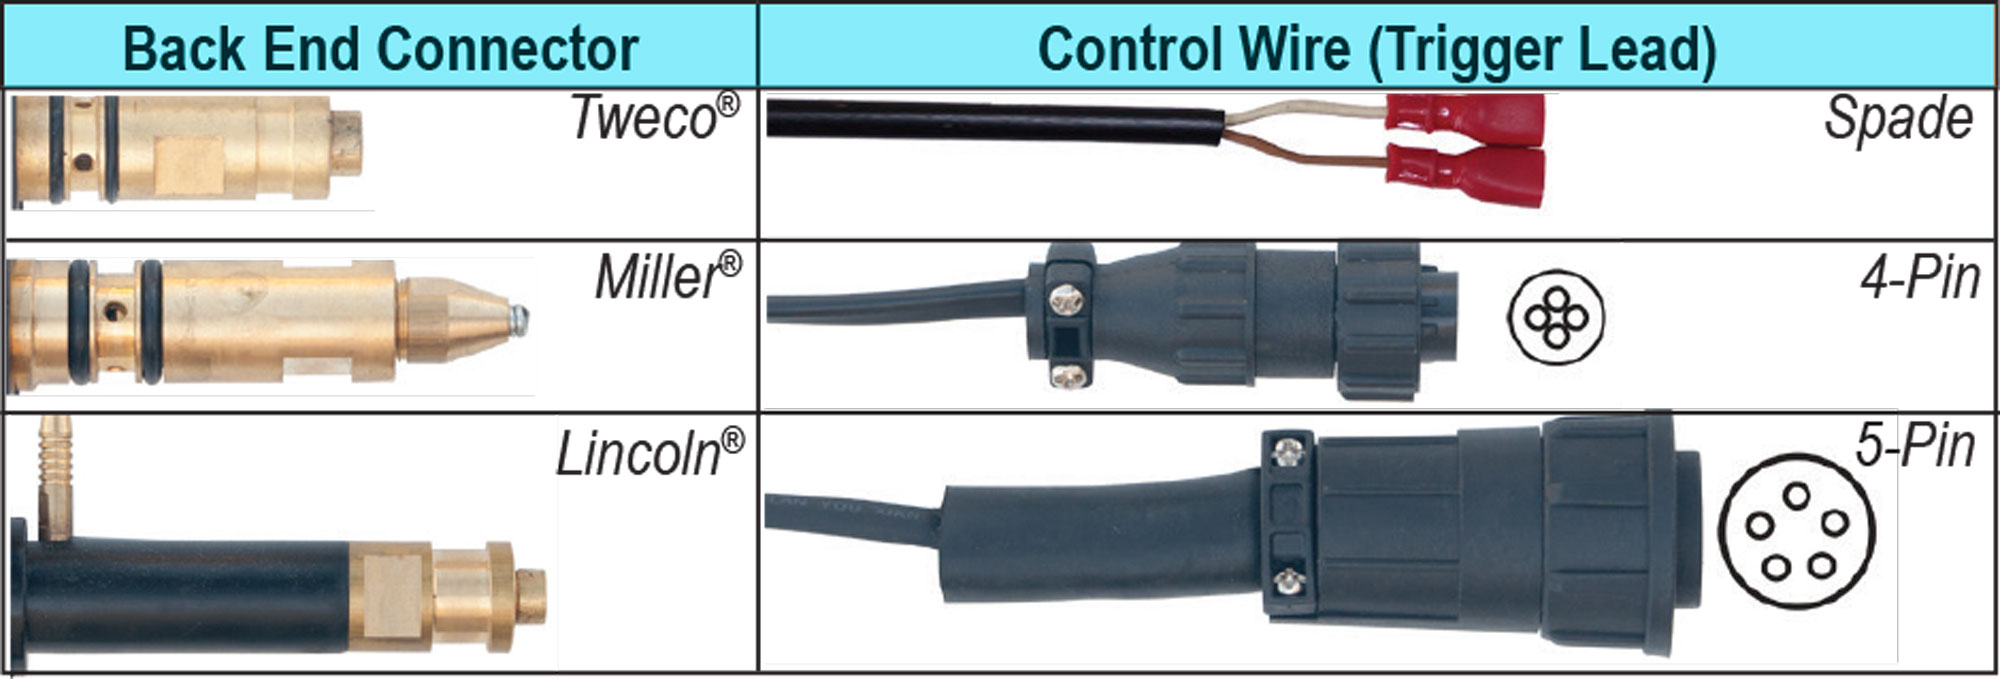 Back End Connector and Control Wires